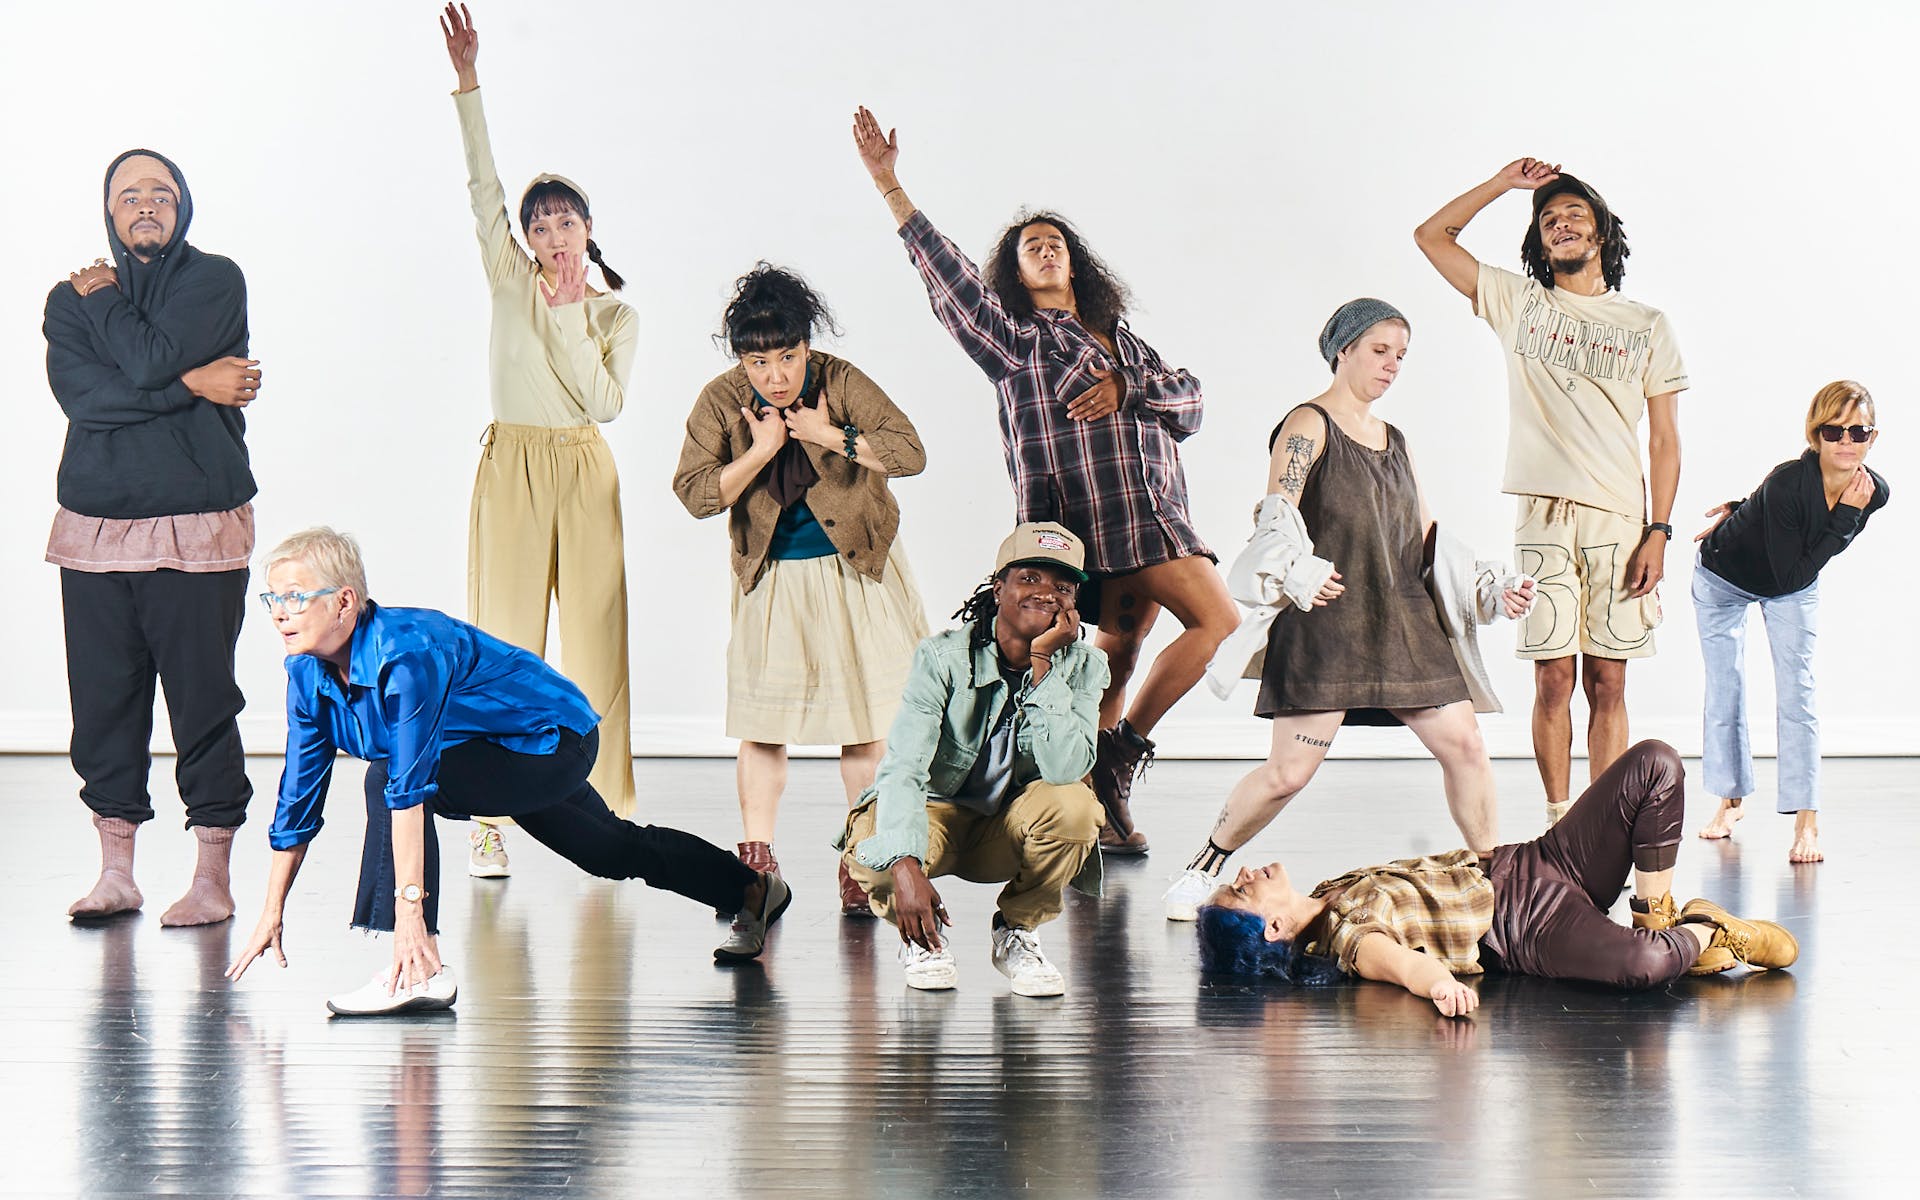 A group of dancers pose on a stage with a white background.